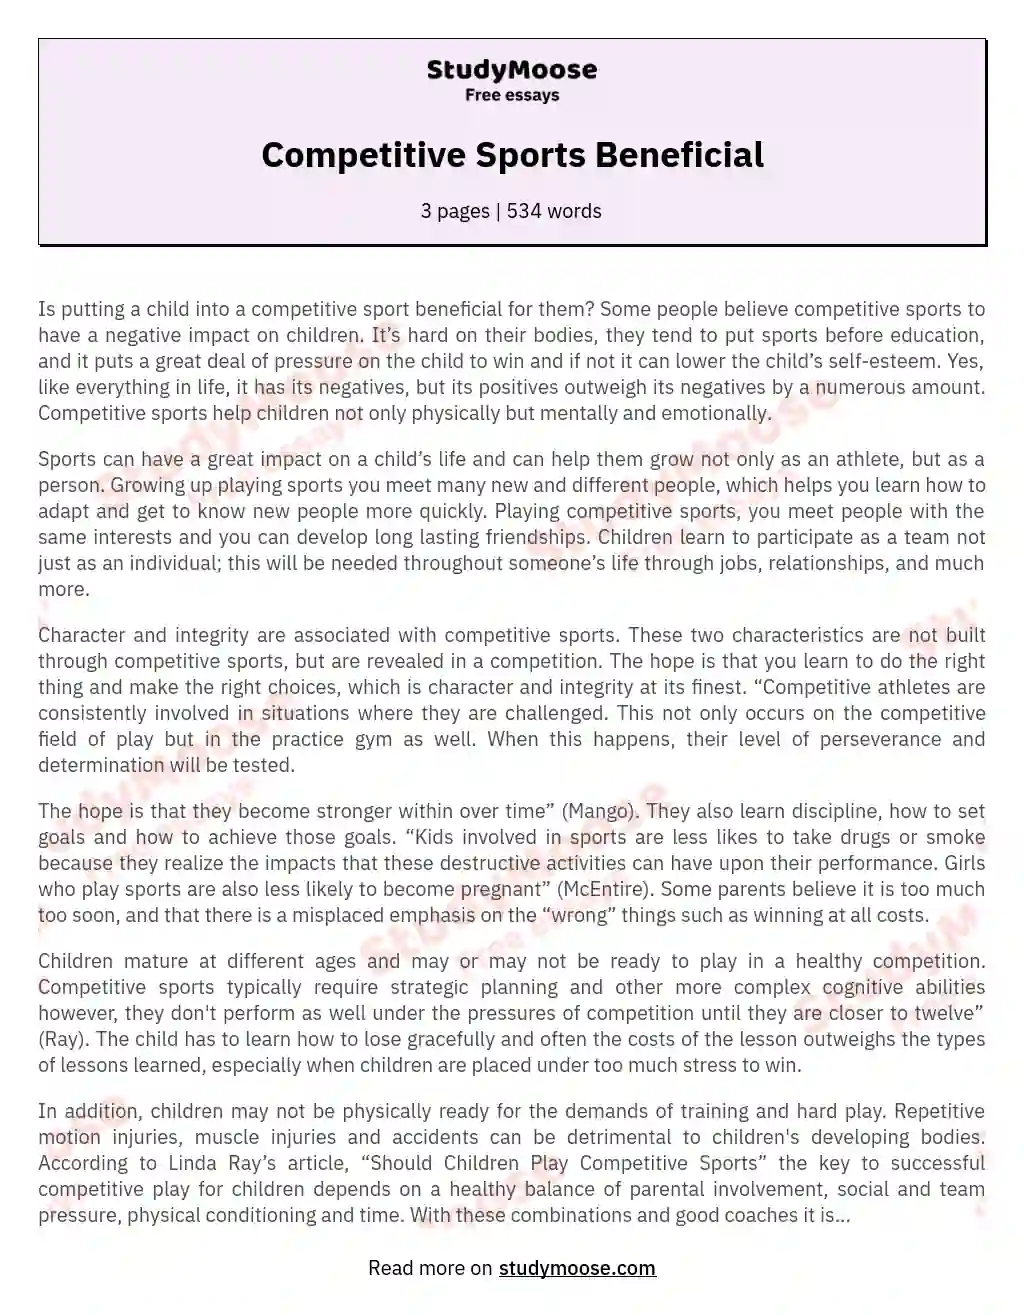 Competitive Sports Beneficial essay